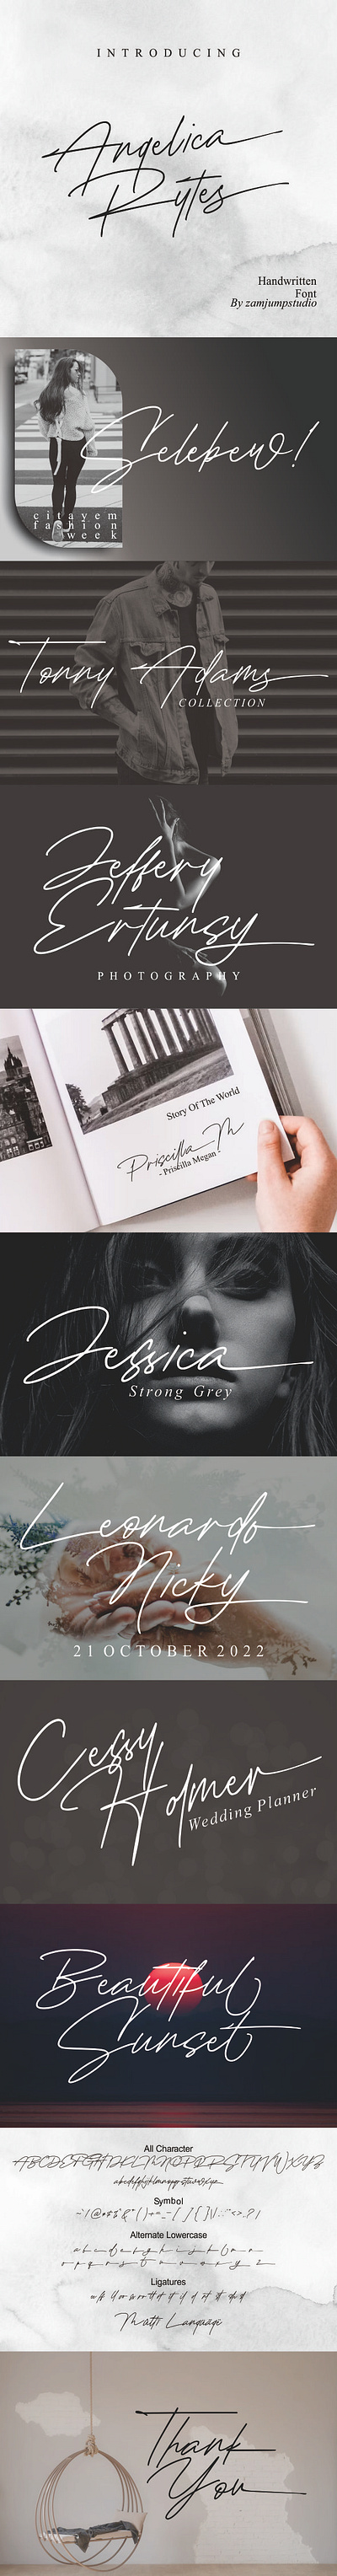 Angelica Rytes photography font